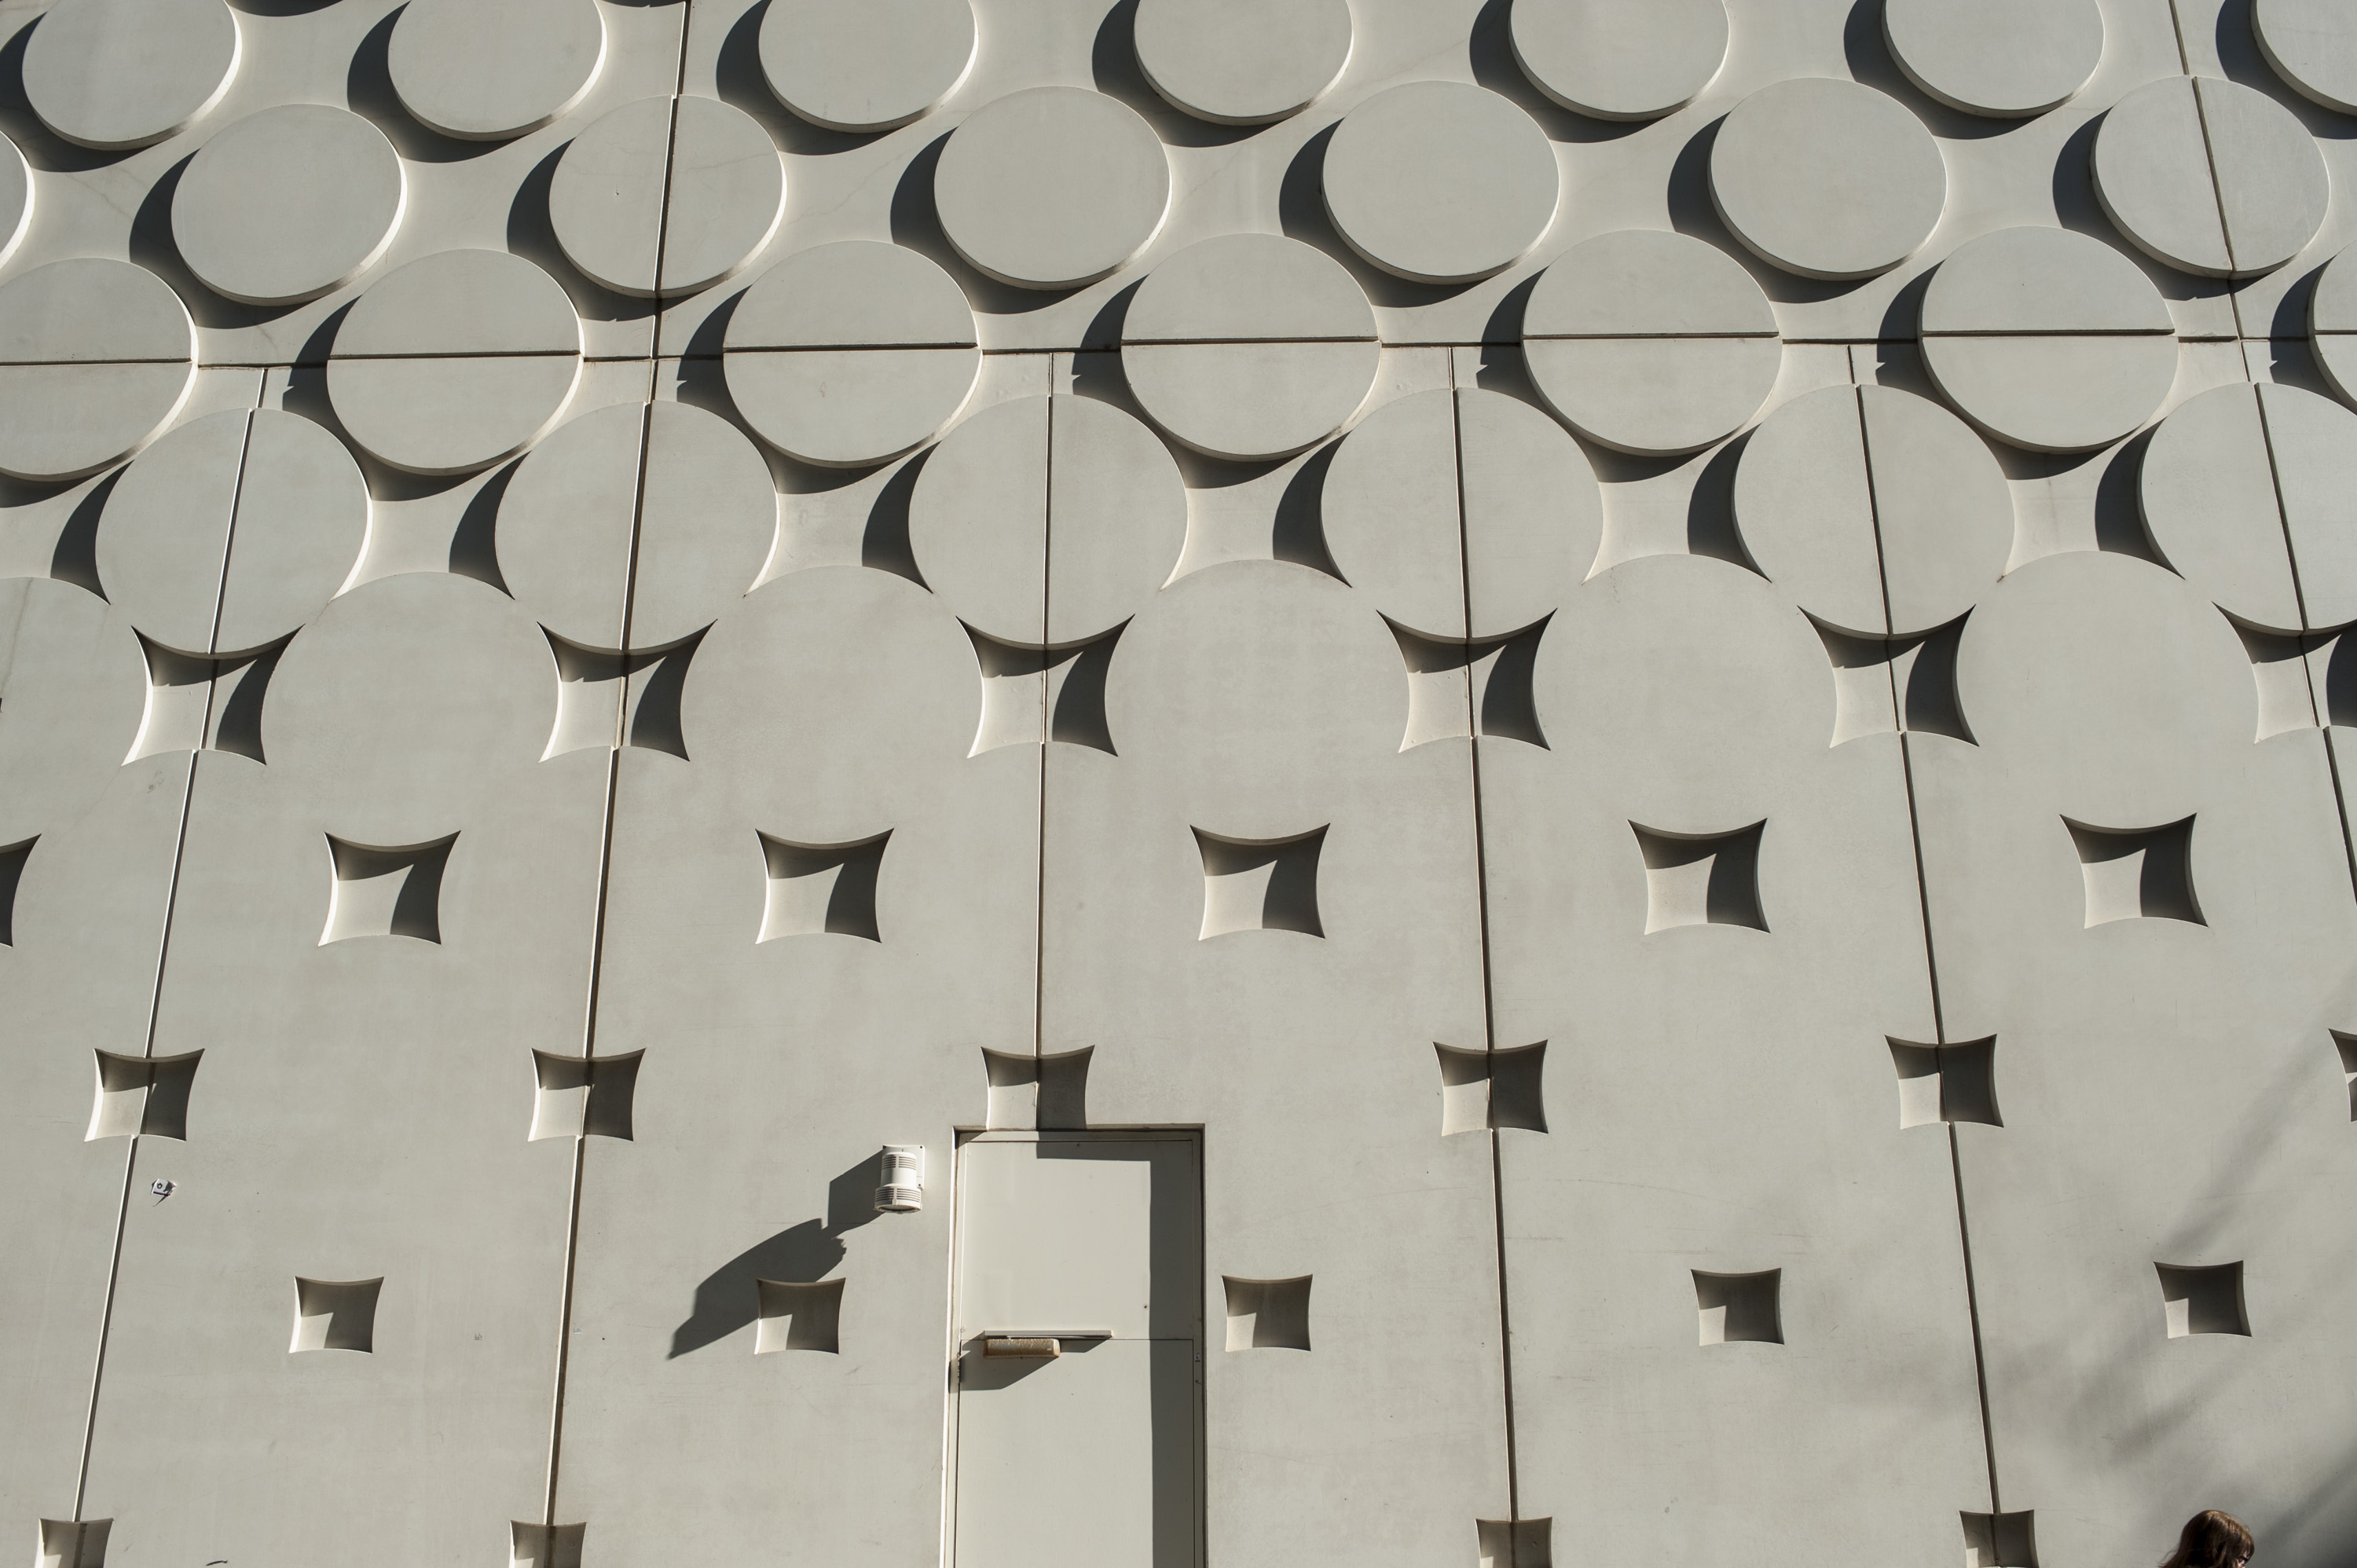 Image of ATC building wall with an indented circle patter